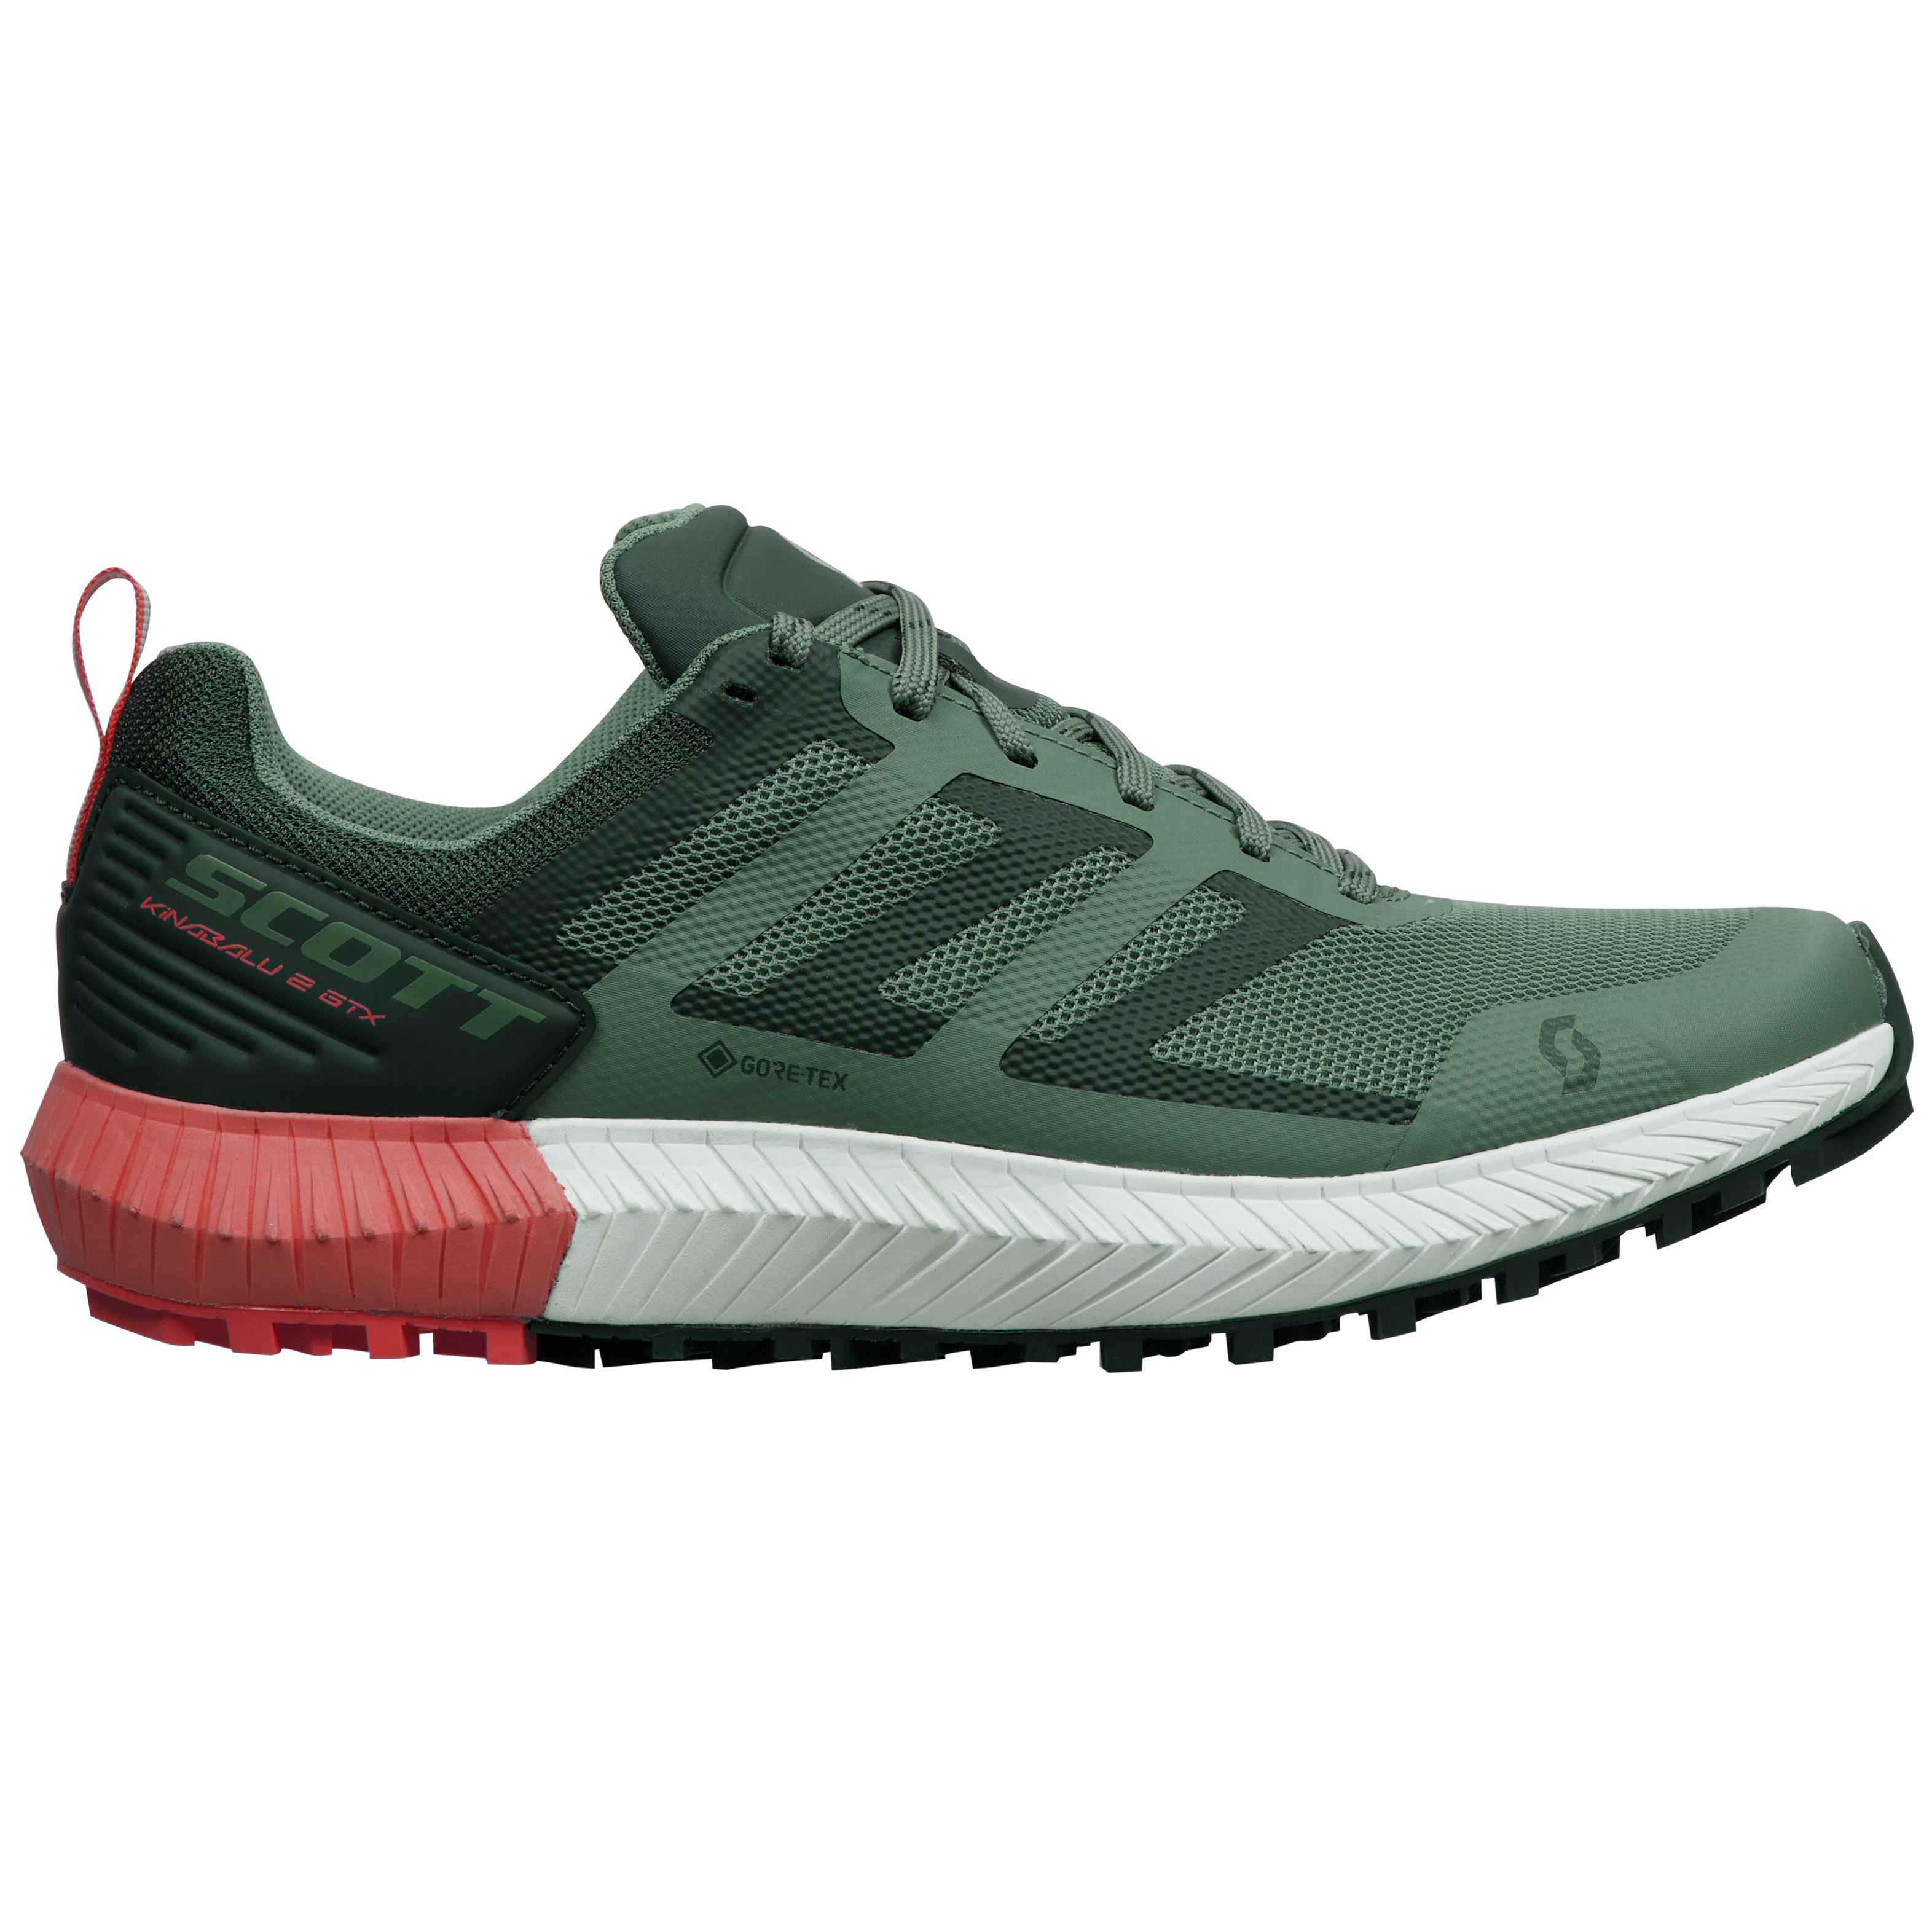 RUNNING SHOES SCOTT WS KINABALU 2 GTX, FROST GREEN-CORAL PINK WOMAN.